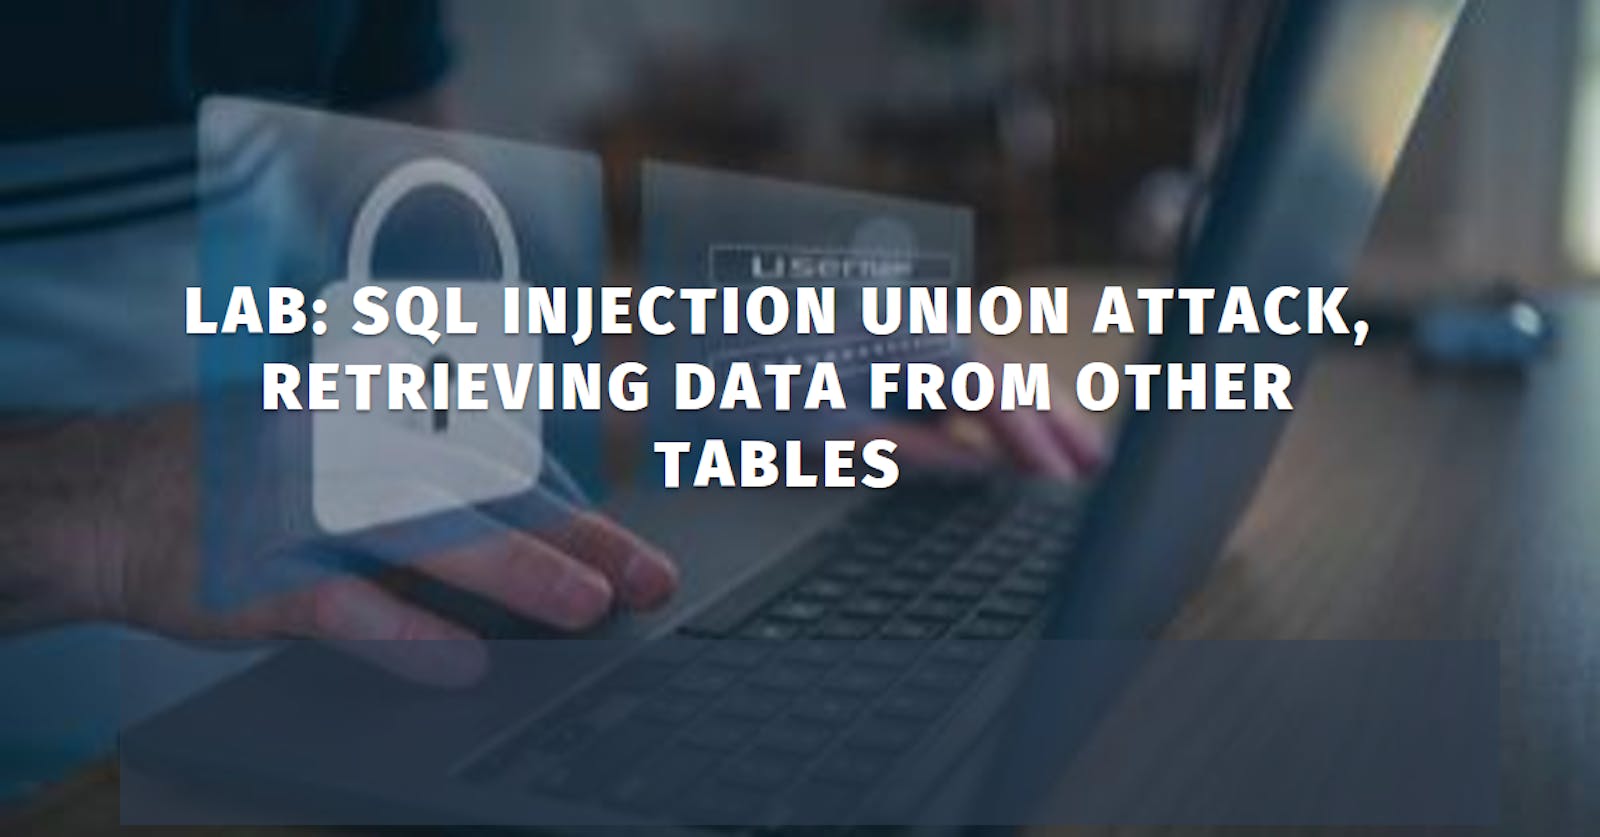 Lab: SQL injection UNION attack, retrieving data from other tables